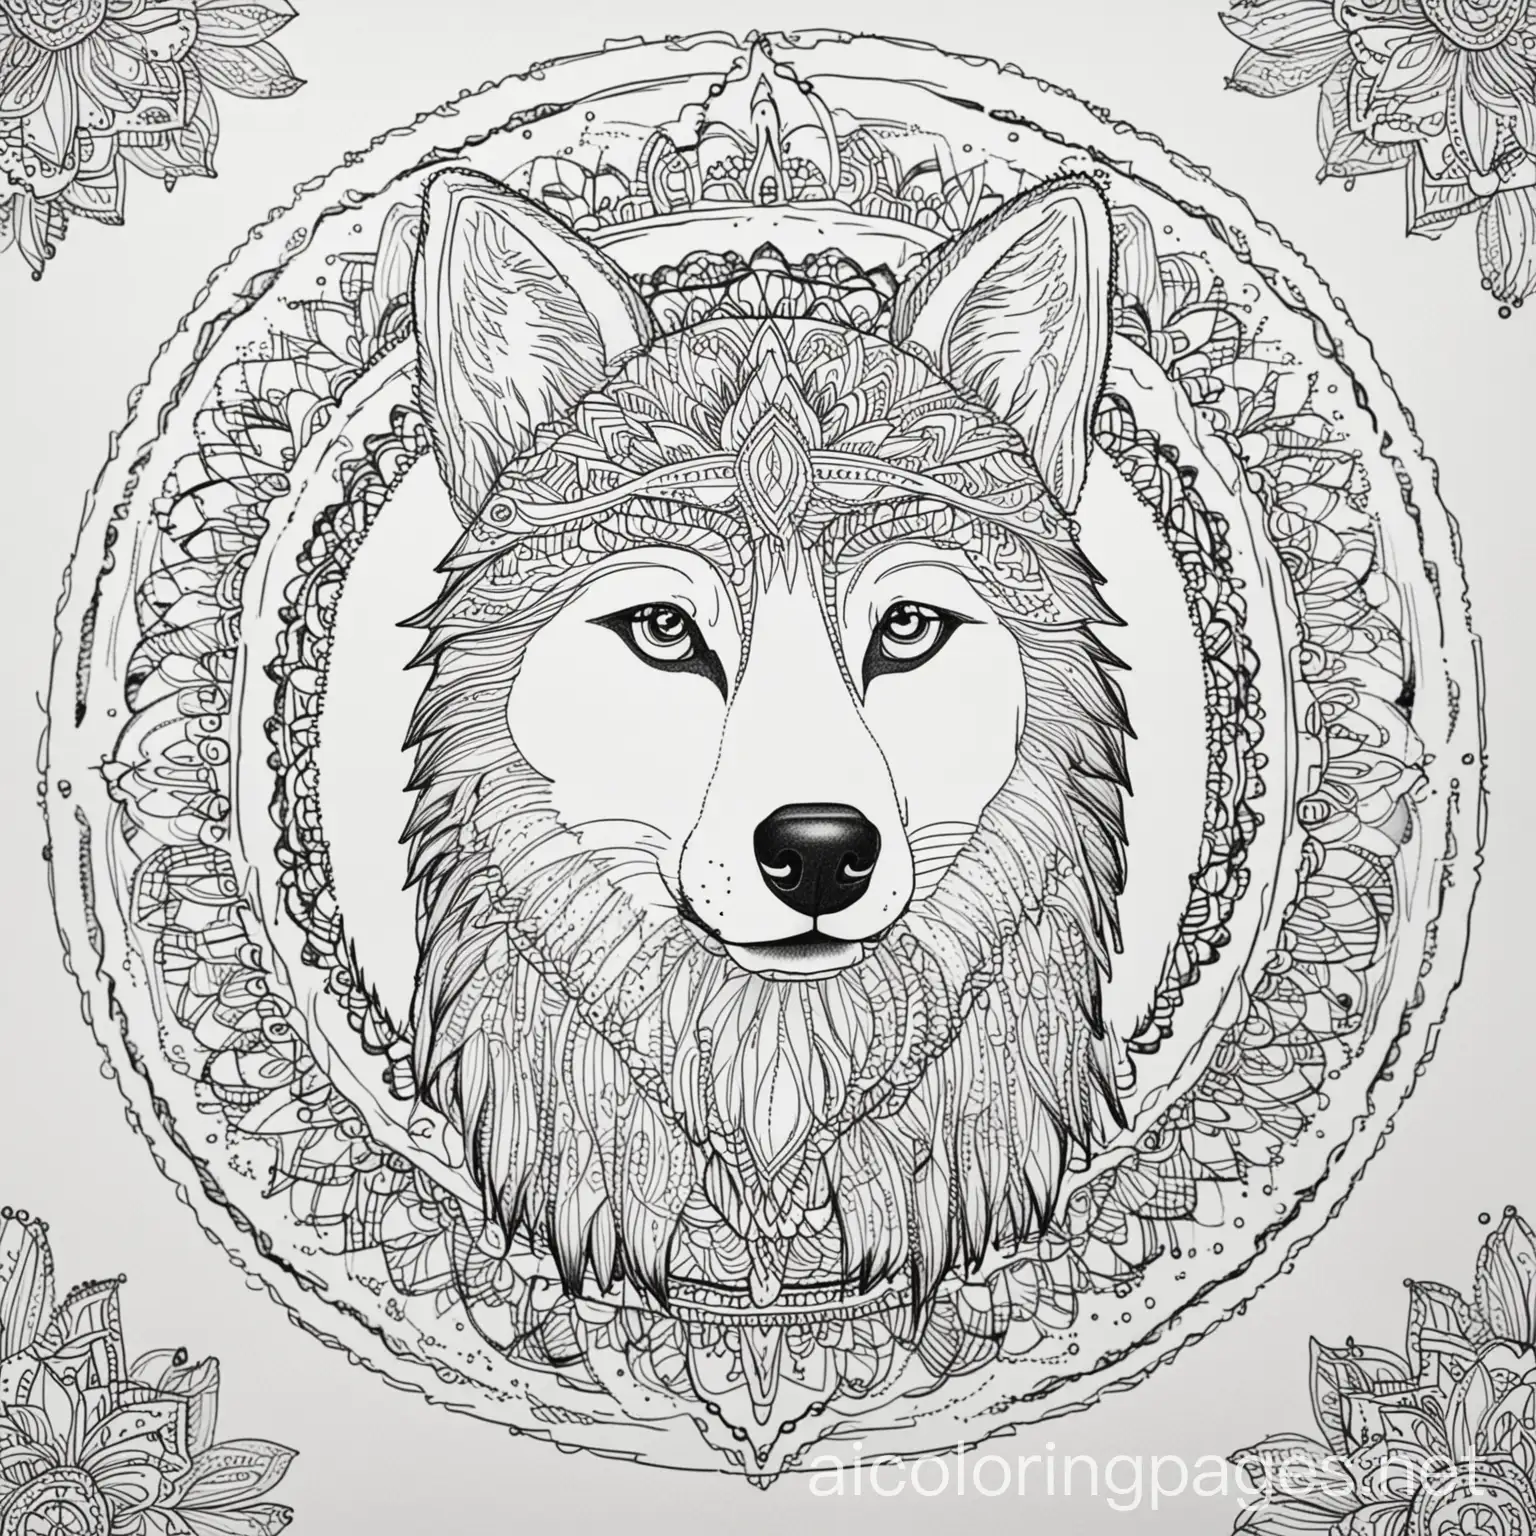 Soothing-Husky-Dog-Mandala-Coloring-Page-for-Kids-Relaxing-Line-Art-on-White-Background